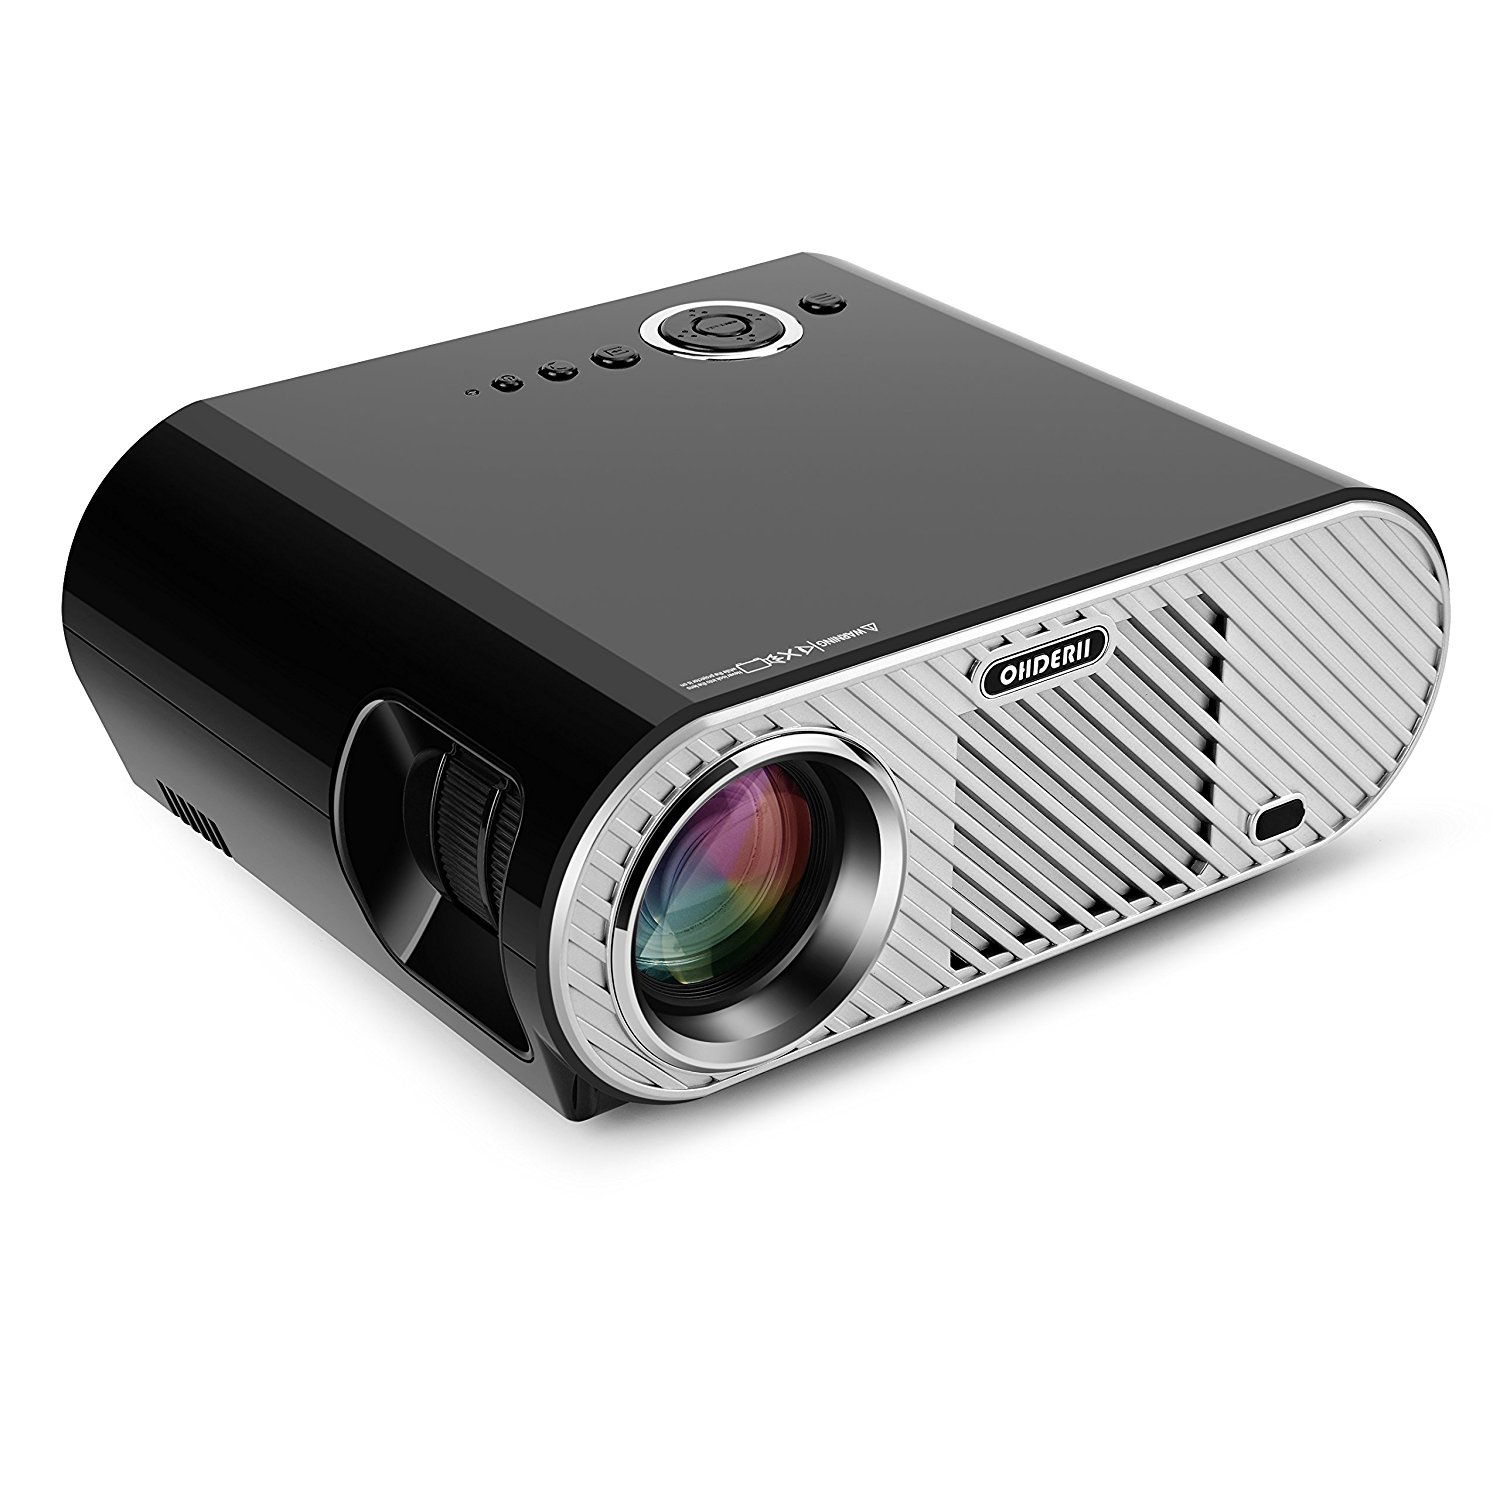 Ohderii Projector, LED Lumens 3200ANSI Luminous efficiency Multimedia Home Theater Projectors 1280 800 Native Resolution Support 1080P HD-ideal for Outdoor Indoor Movie Night or Video Games